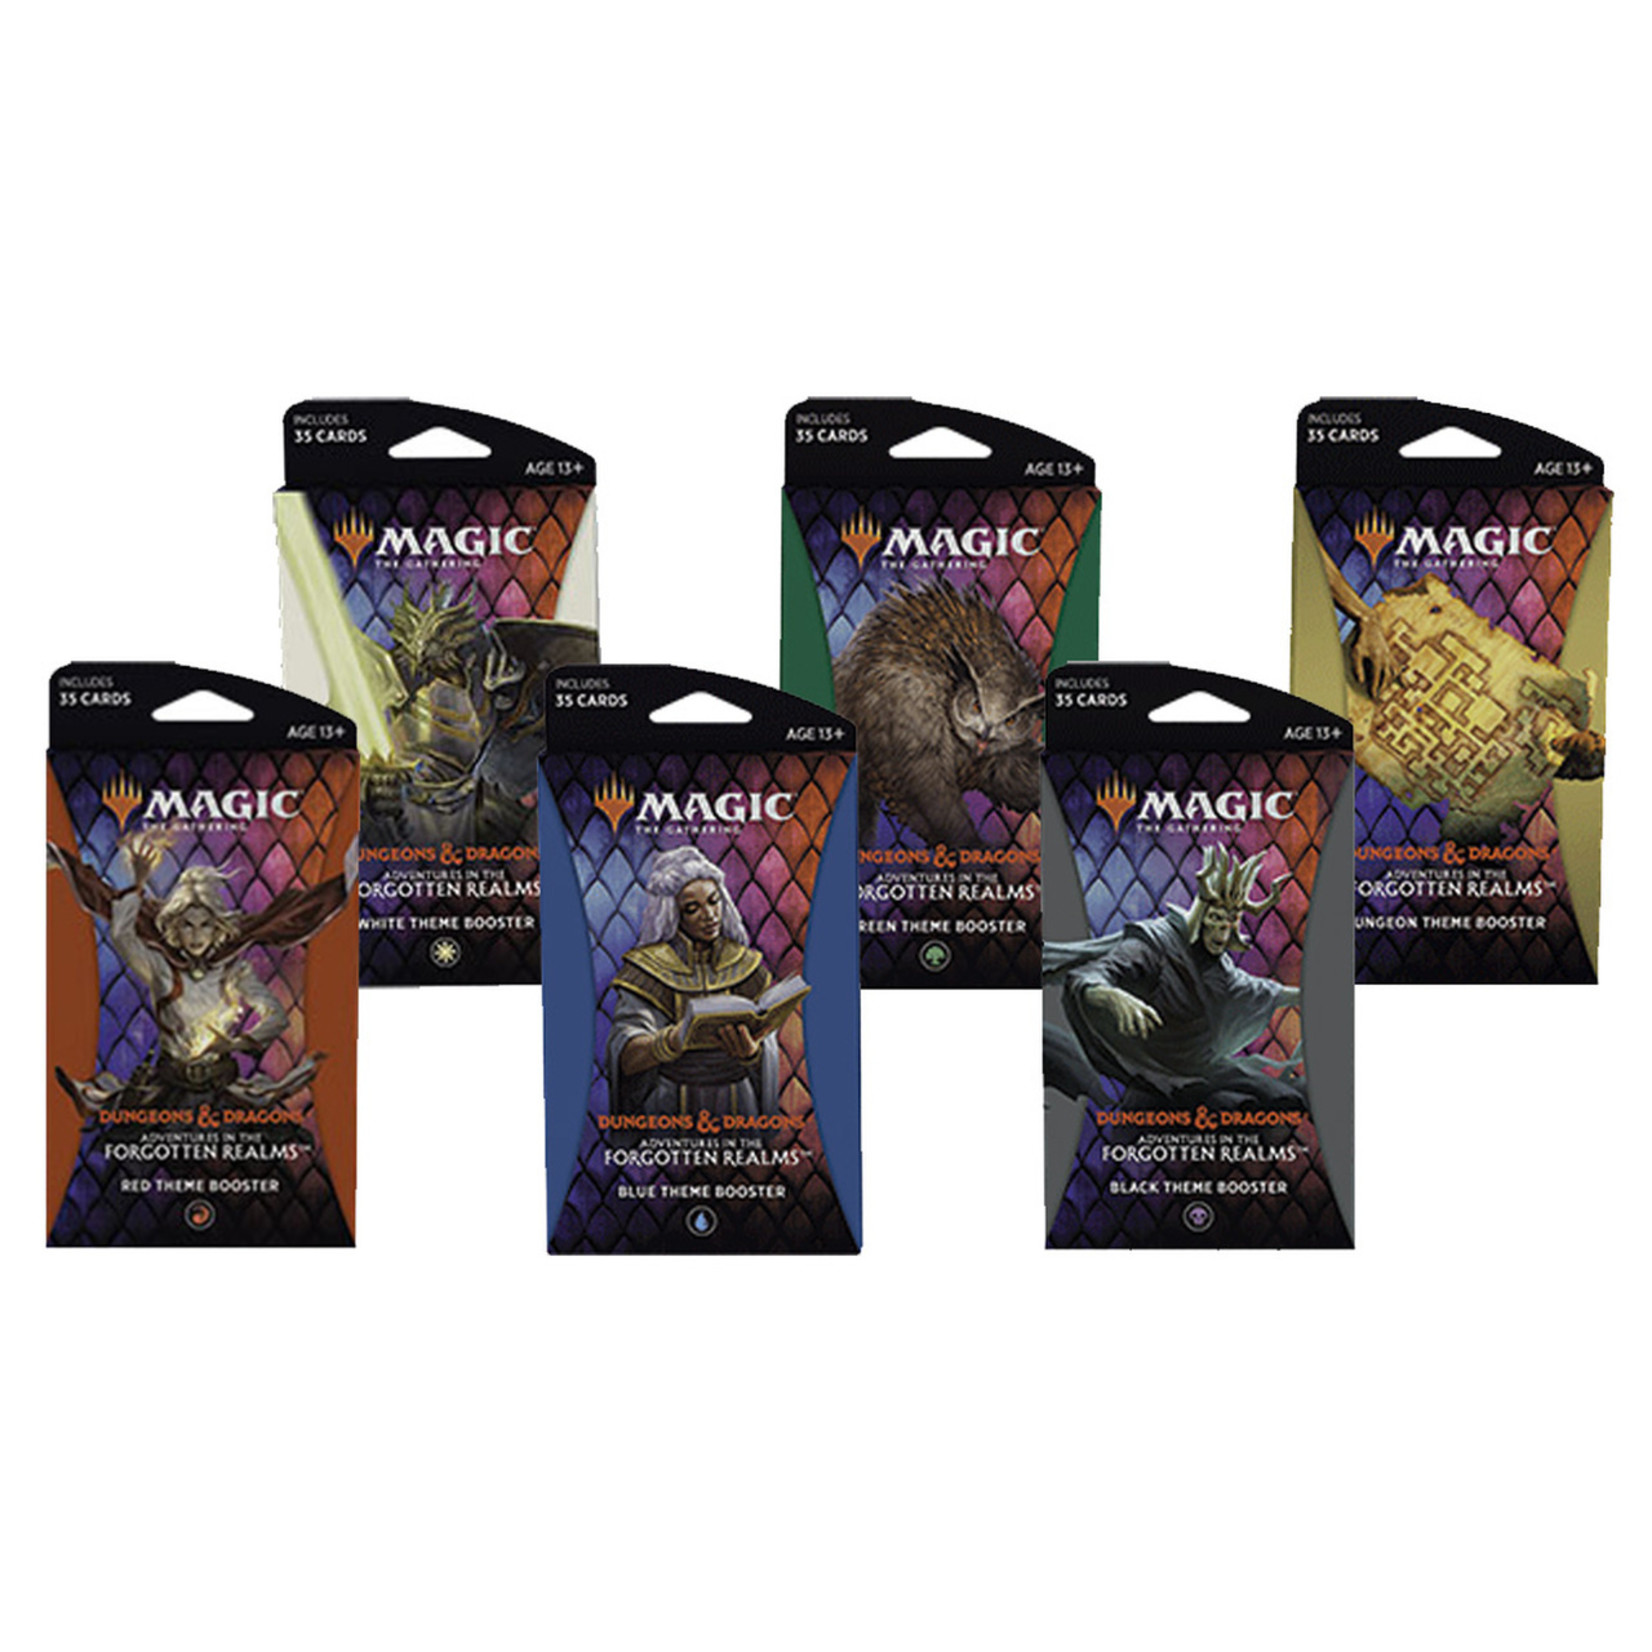 Wizards of the Coast Adventures in the Forgotten Realms Theme Booster